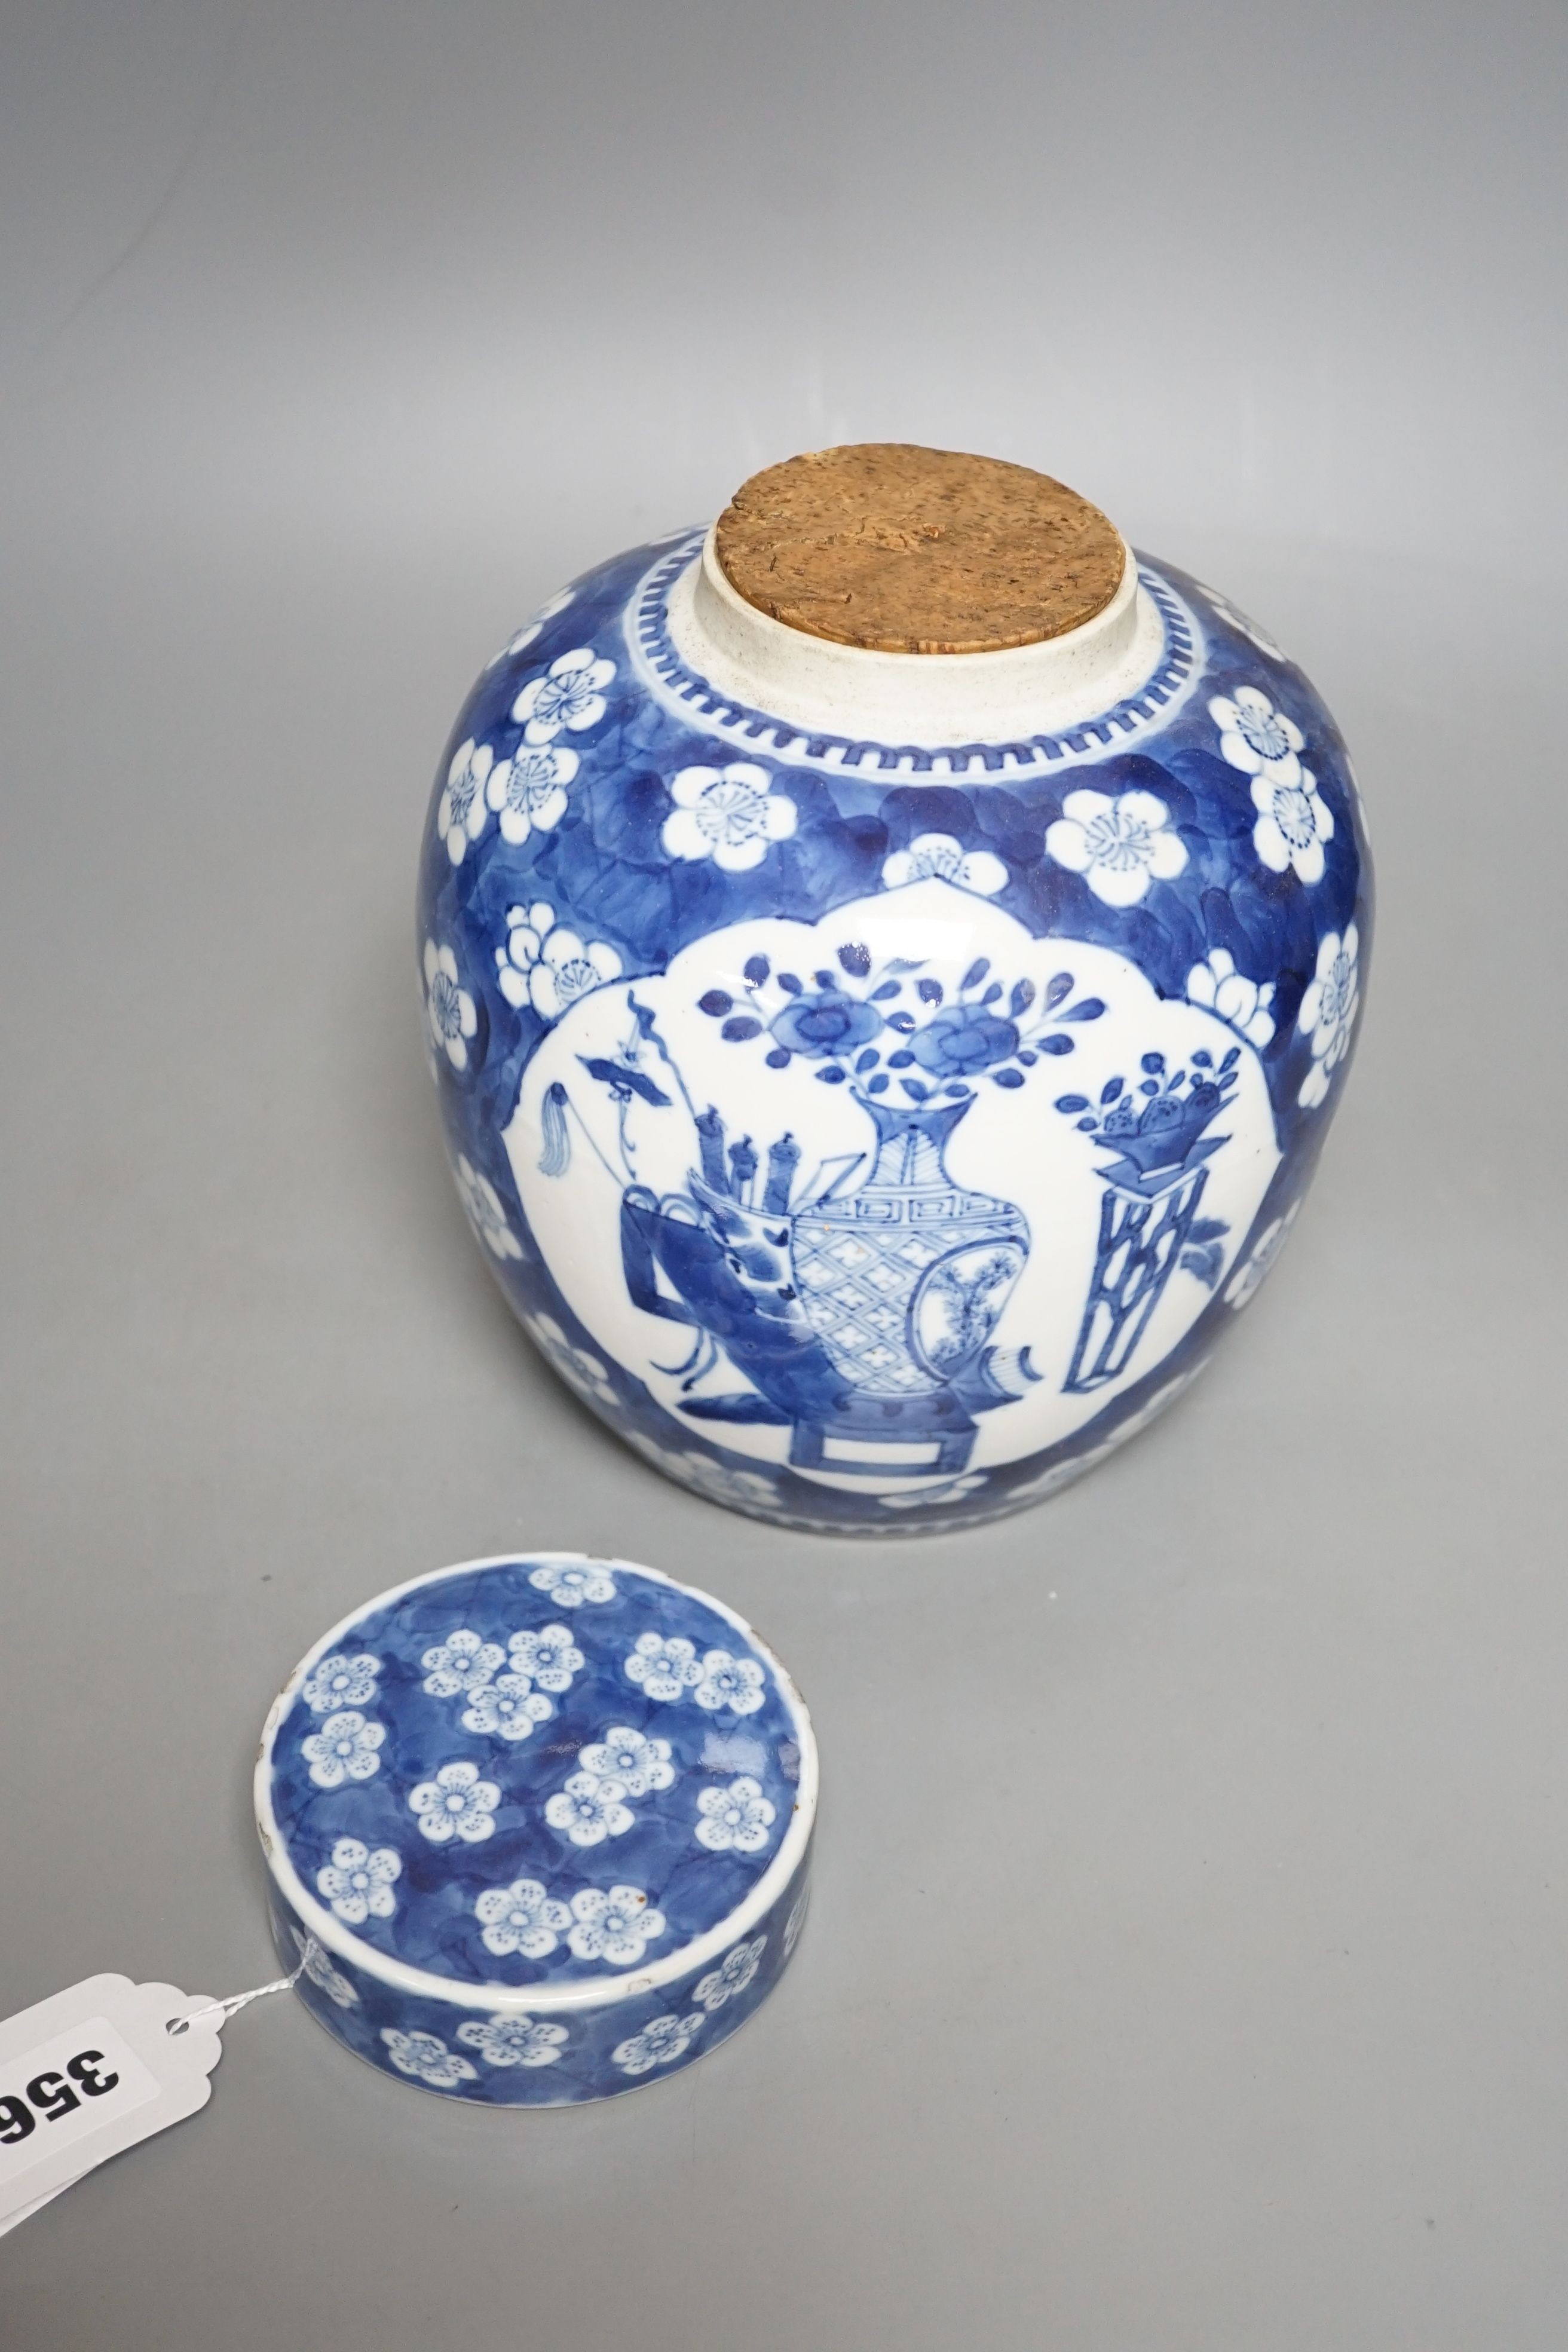 A 19th century Chinese blue and white ginger jar and cover - 20.5cm tall